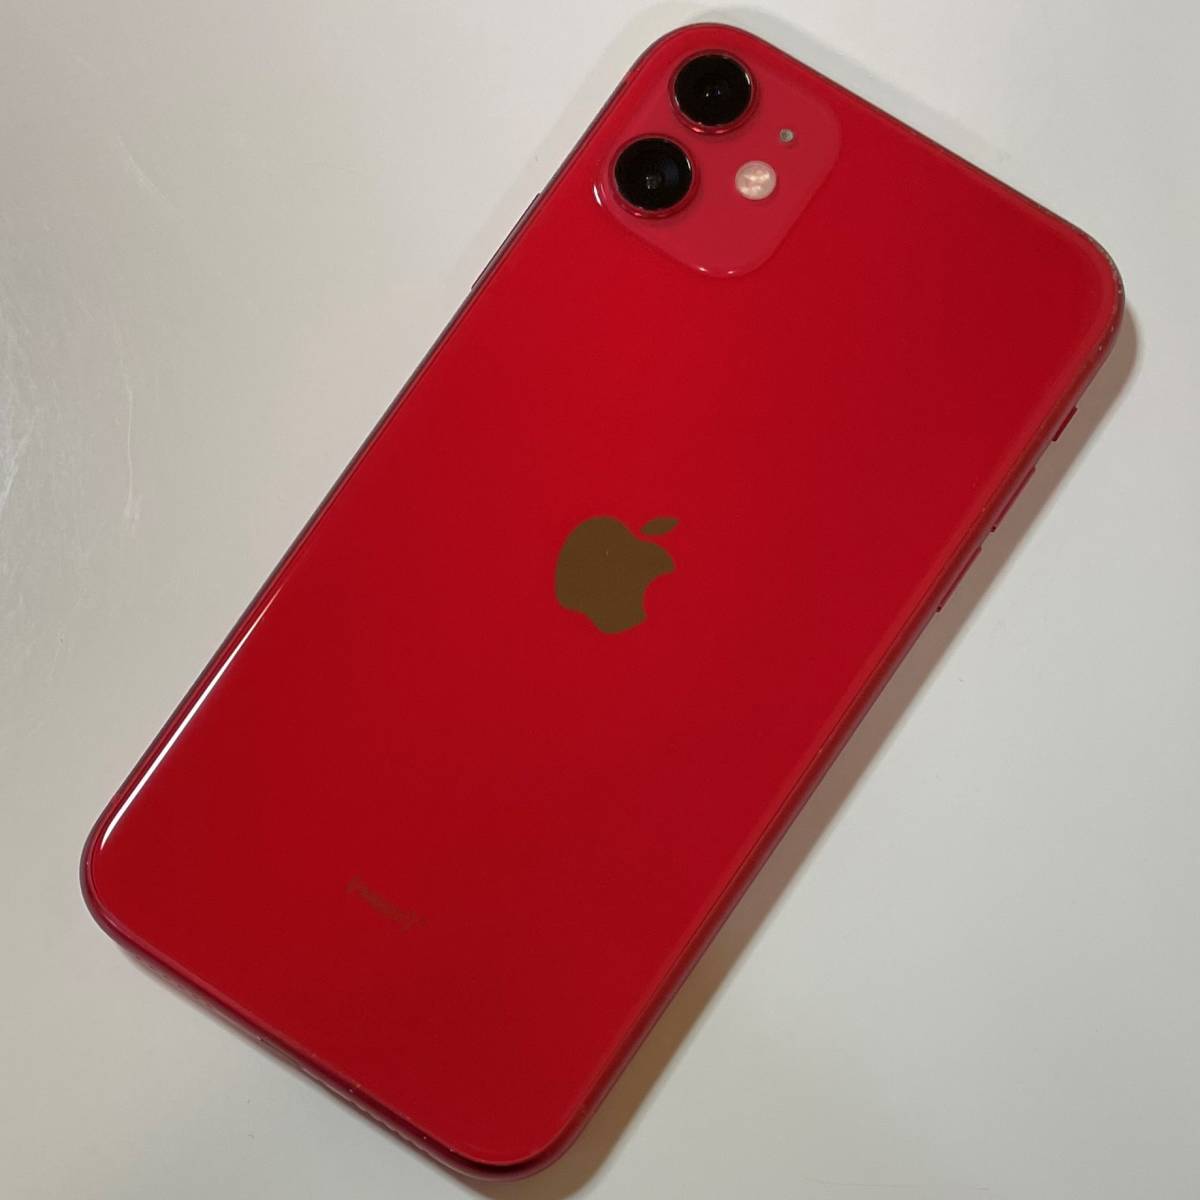 SIMフリー iPhone 11 (PRODUCT)RED Special Edition 128GB MWM32J/A バッテリー最大容量